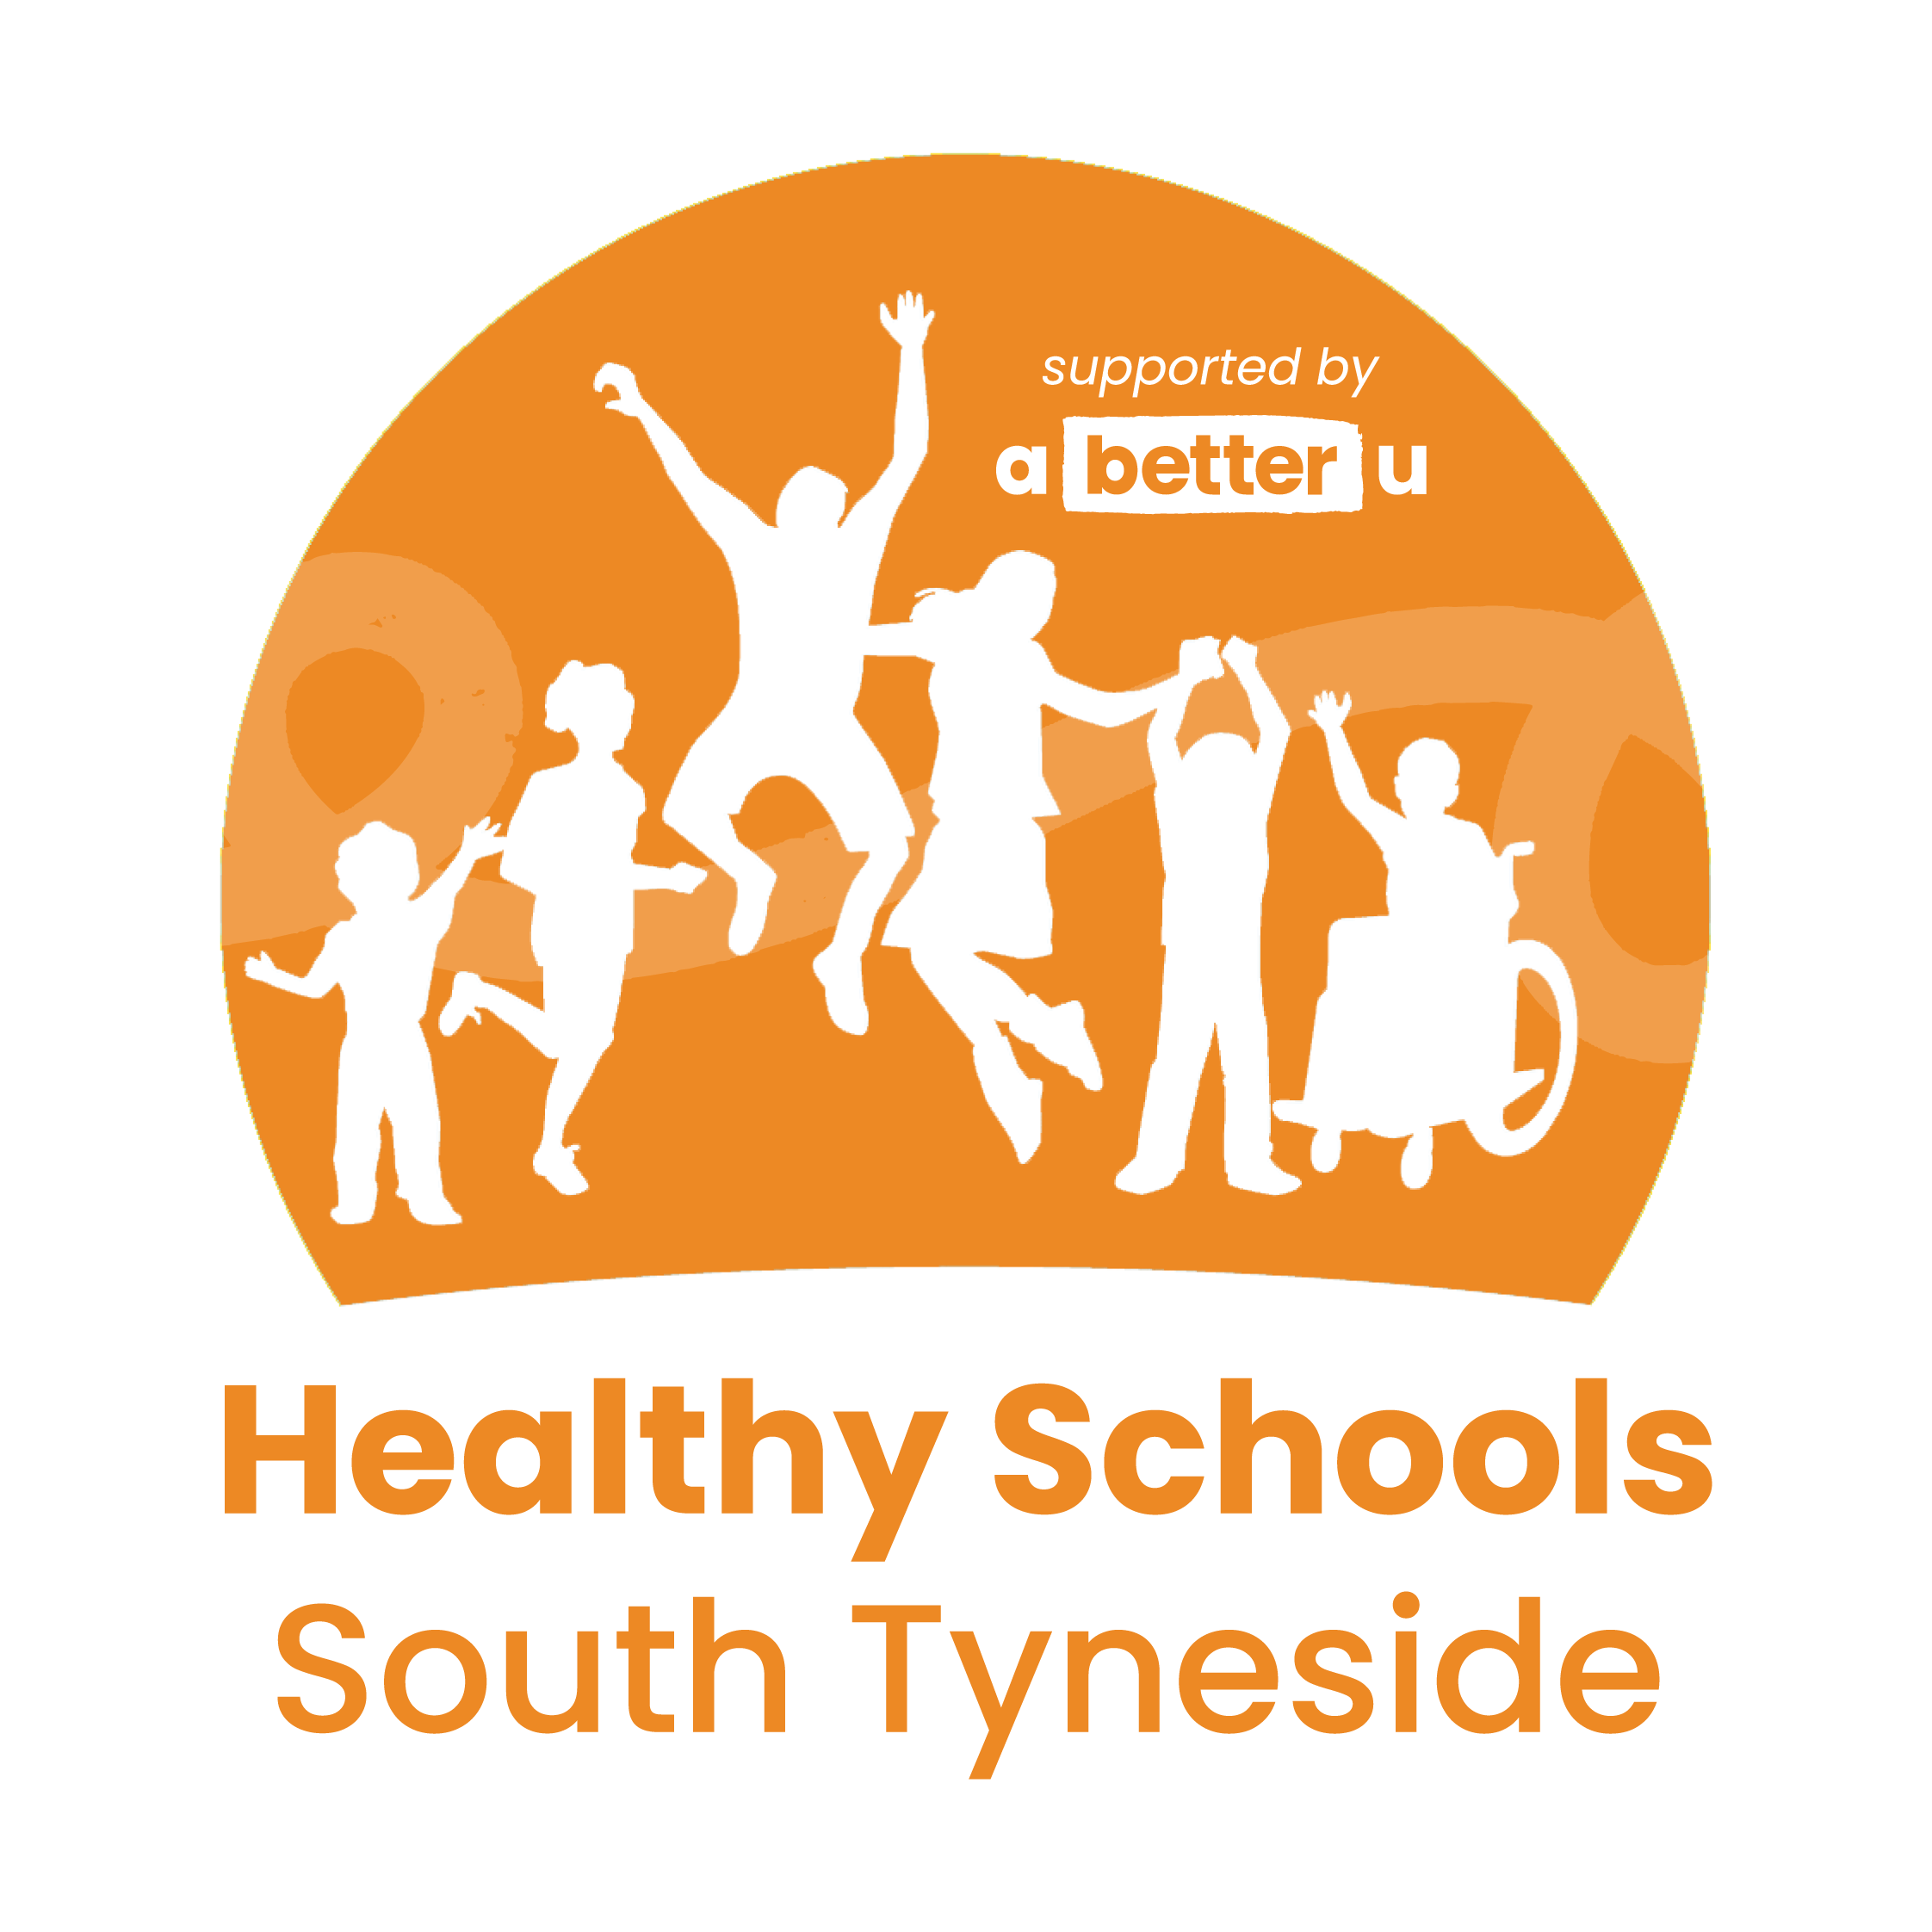 Healthy Schools South Tyneside (supported by a better u) logo